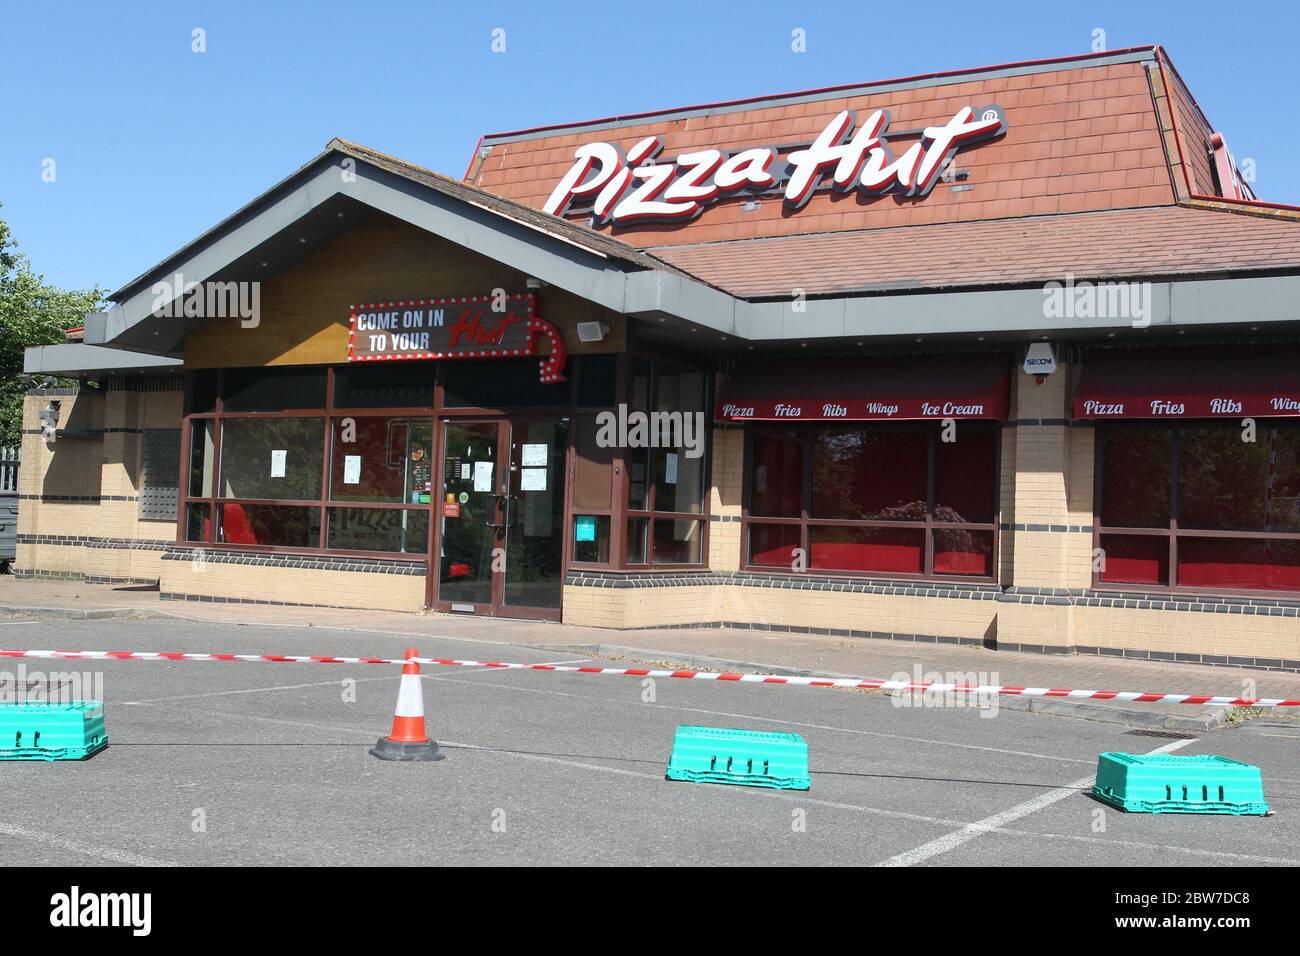 A coned-off area in the car park at Pizza Hut in Galleys Corner, Braintree. The restaurant remains closed during the COVID-19 pandemic and lockdown. Stock Photo